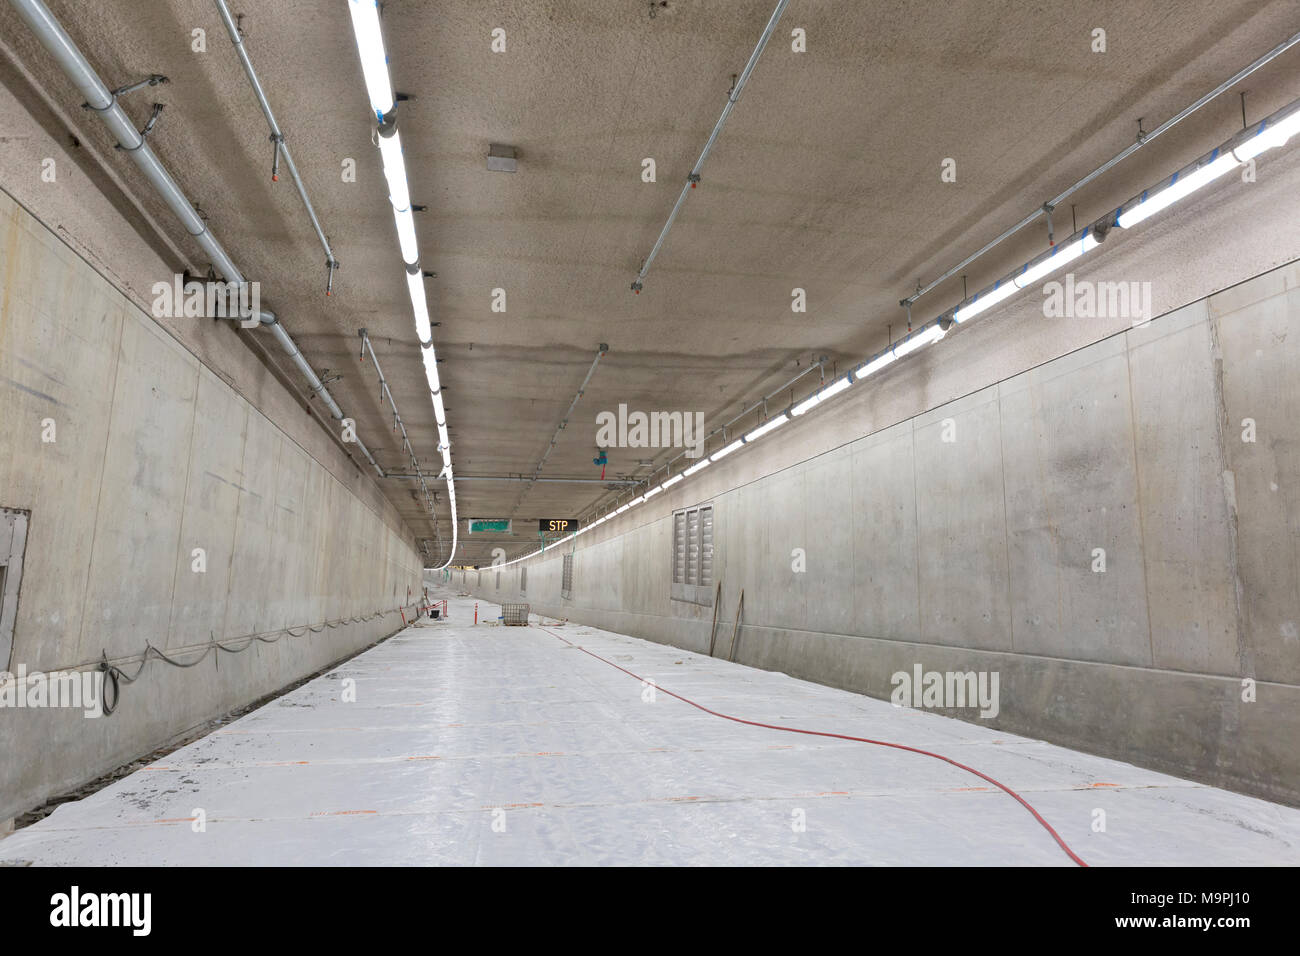 Seattle, Washington, USA. 27th Mar, 2018. The lower deck of the SR 99 Tunnel under construction. The Alaskan Way Viaduct Replacement Program’s road decks have been completed and the tunnel’s operational and safety systems are currently being installed. The bored road tunnel is replacing the Alaskan Way Viaduct and will carry State Route 99 under downtown Seattle from the SODO neighborhood to South Lake Union. Credit: Paul Christian Gordon/Alamy Live News Stock Photo